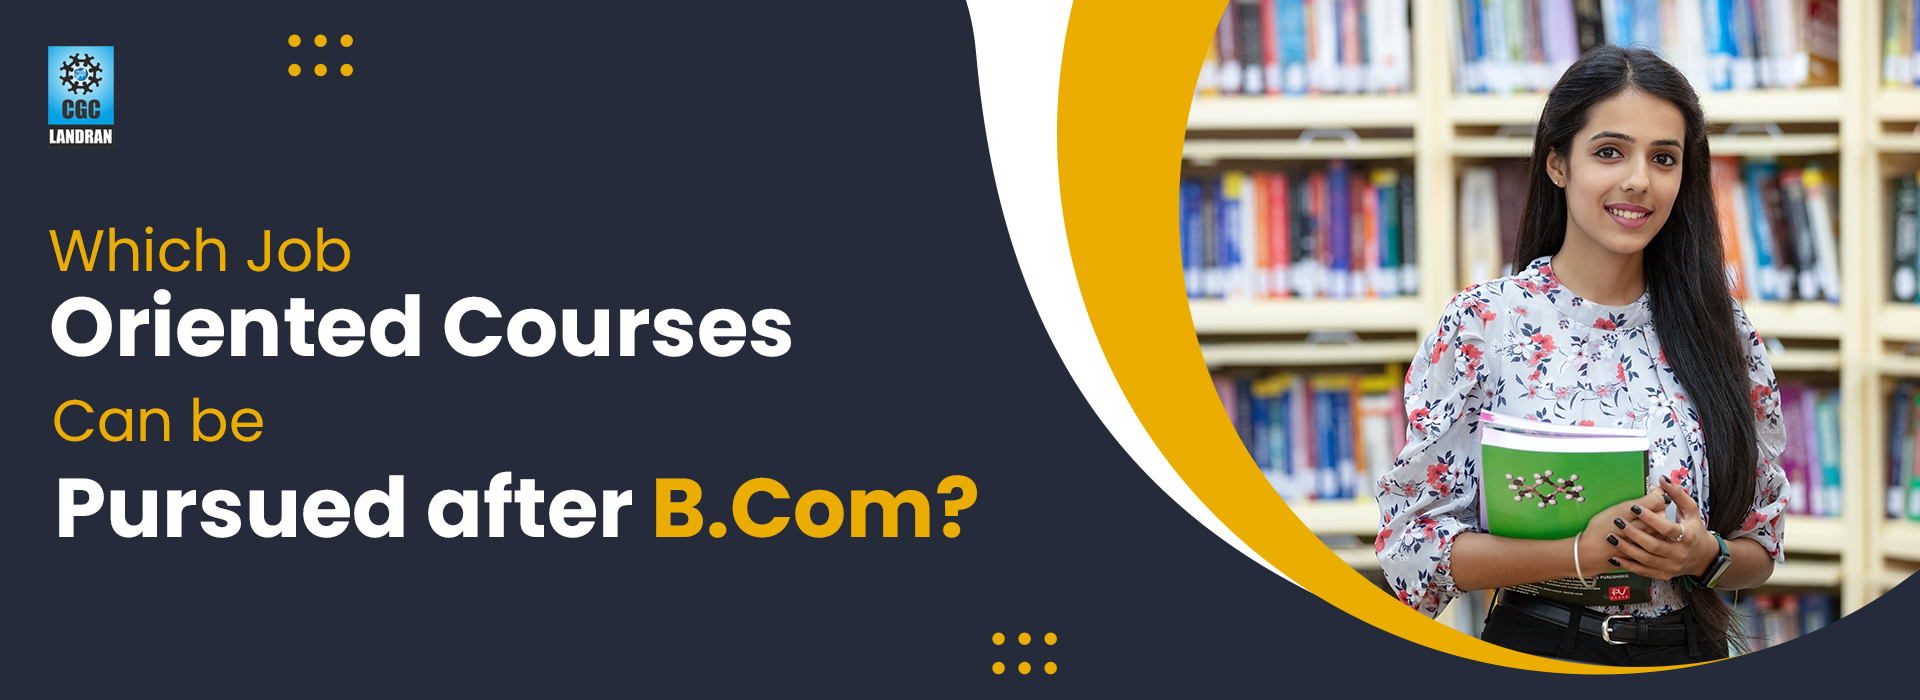 Which Job Oriented Courses Can be Pursued after B.Com? 